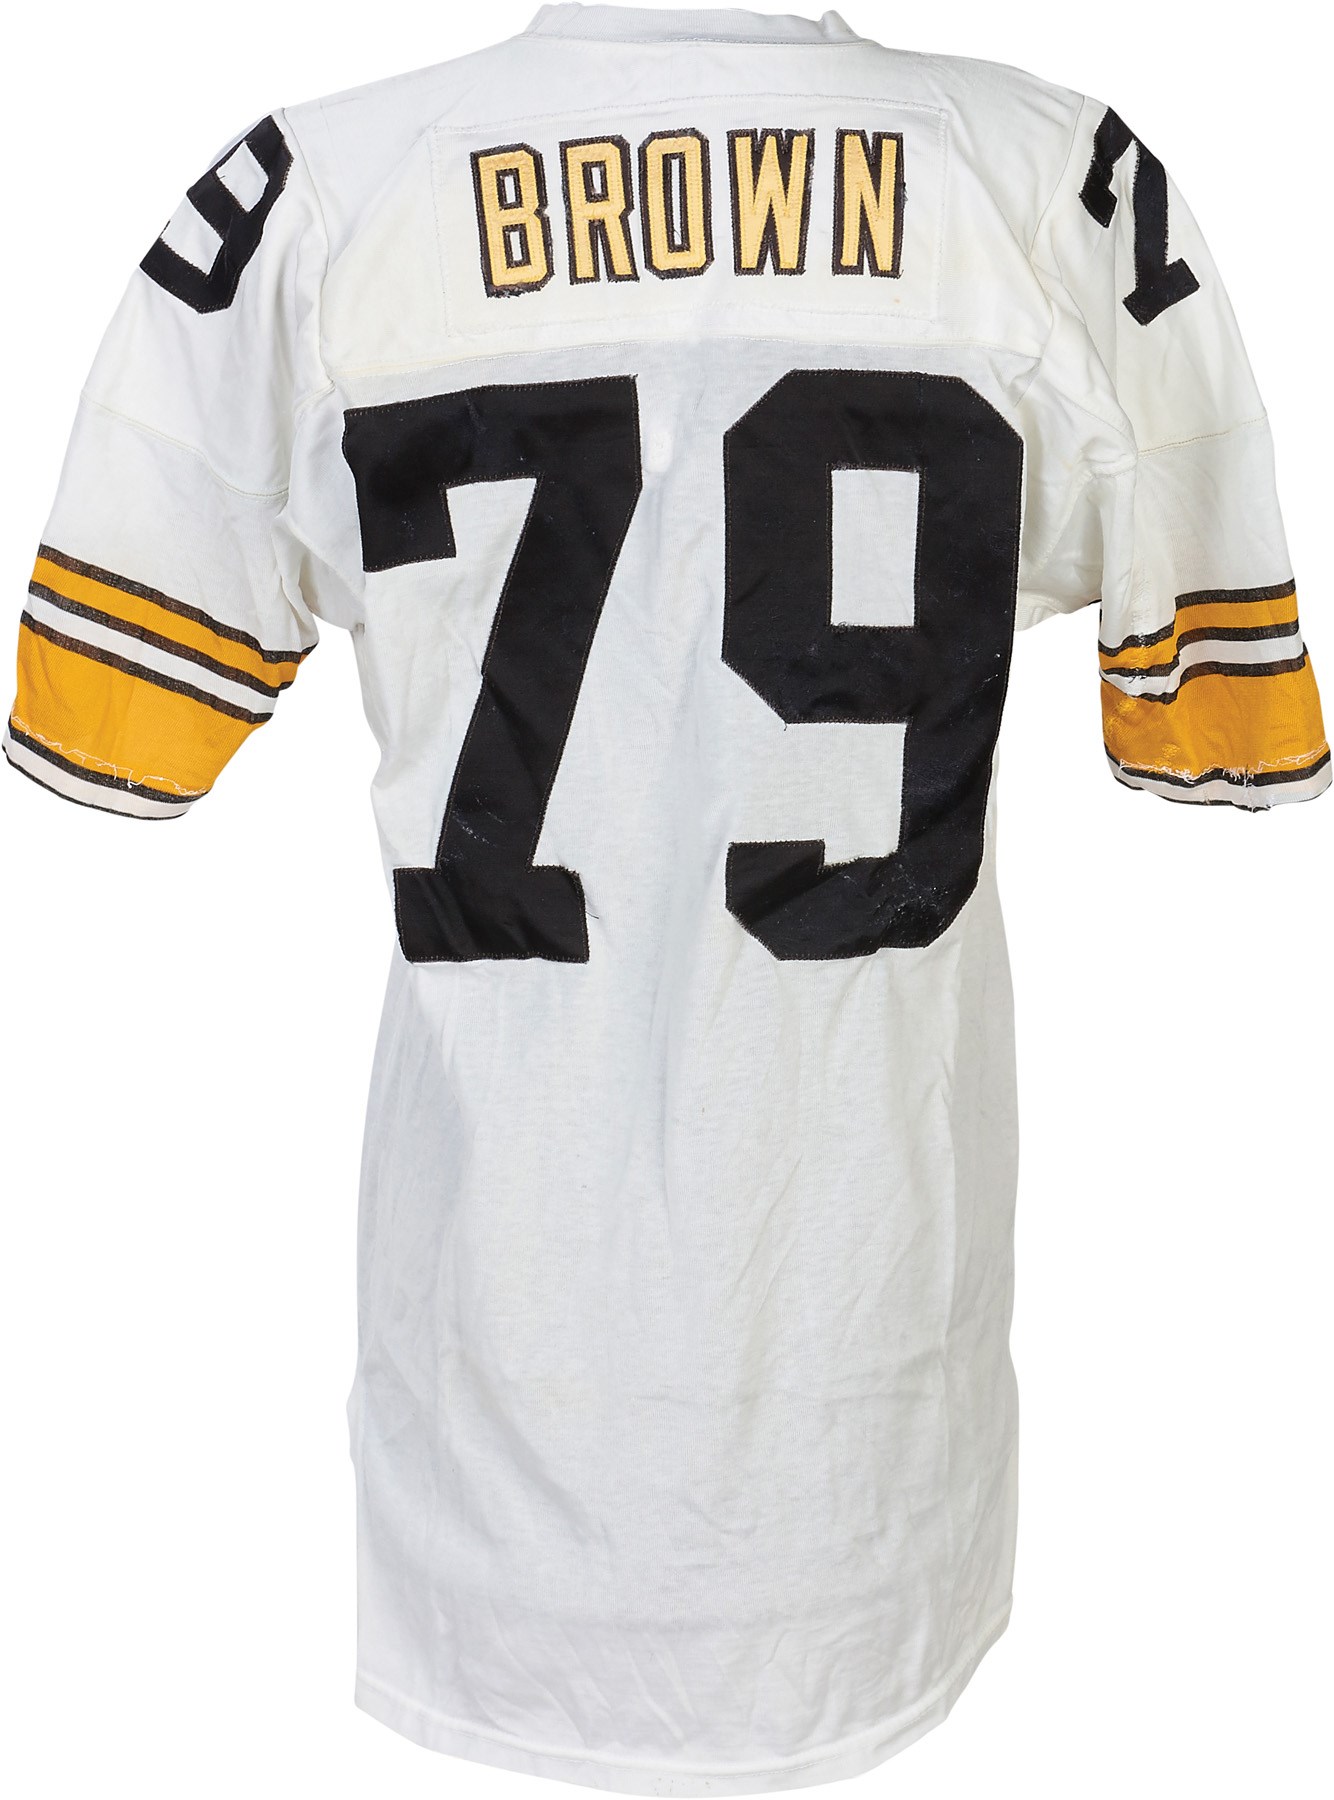 The Pittsburgh Steelers Game Worn Jersey Archive - 1981 Larry Brown Pittsburgh Steelers Game Worn Jersey